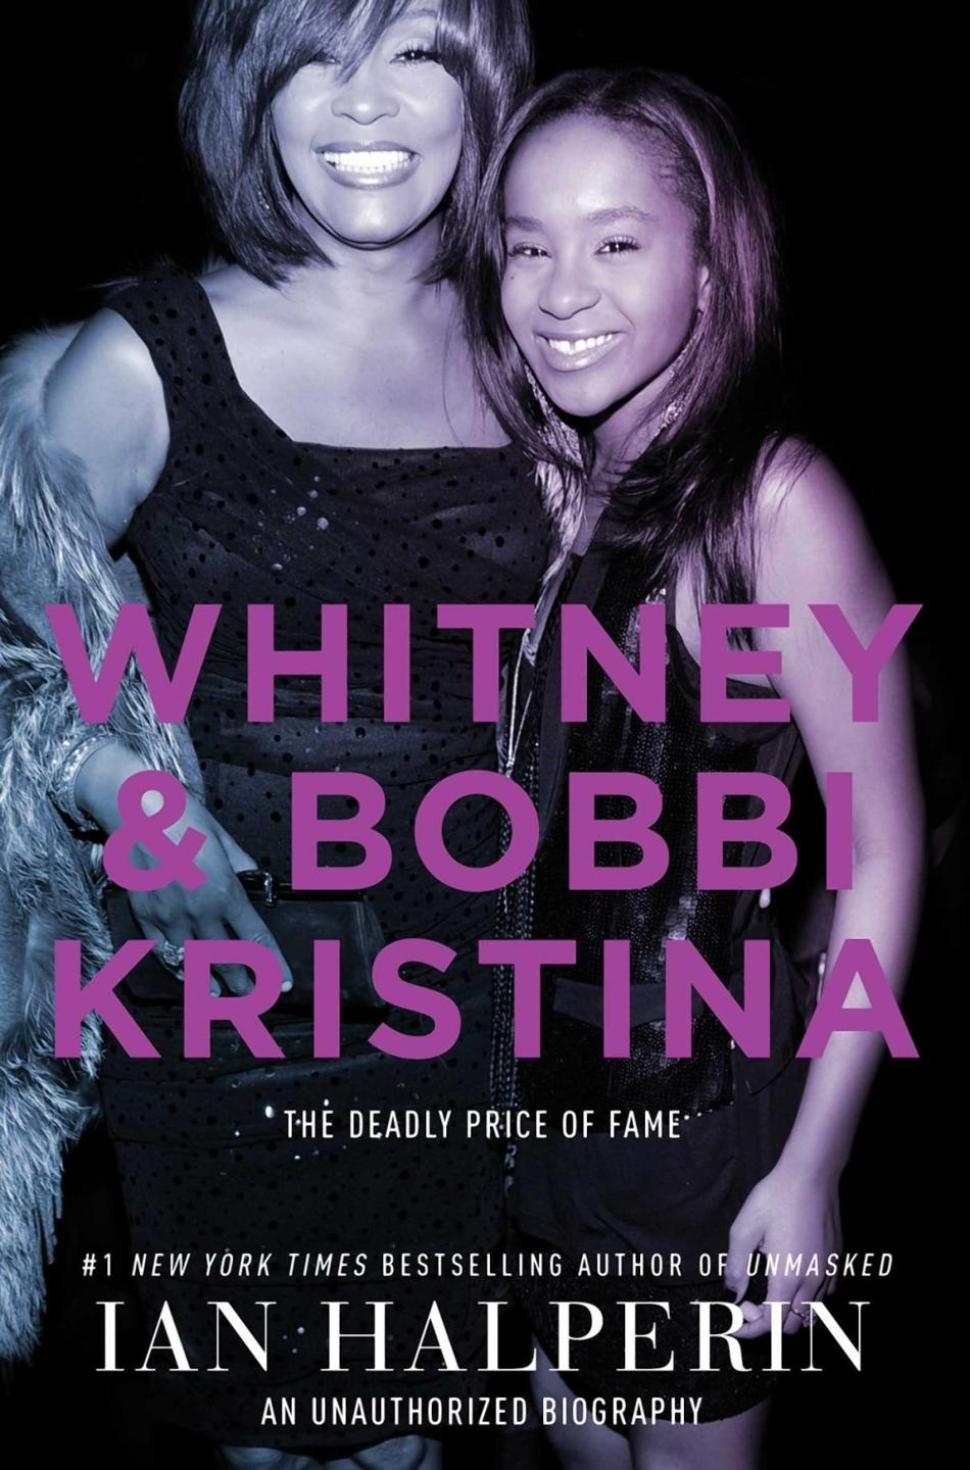 New book alleges Bobbi Kristina was already drug-addicted, suicidal by age 14